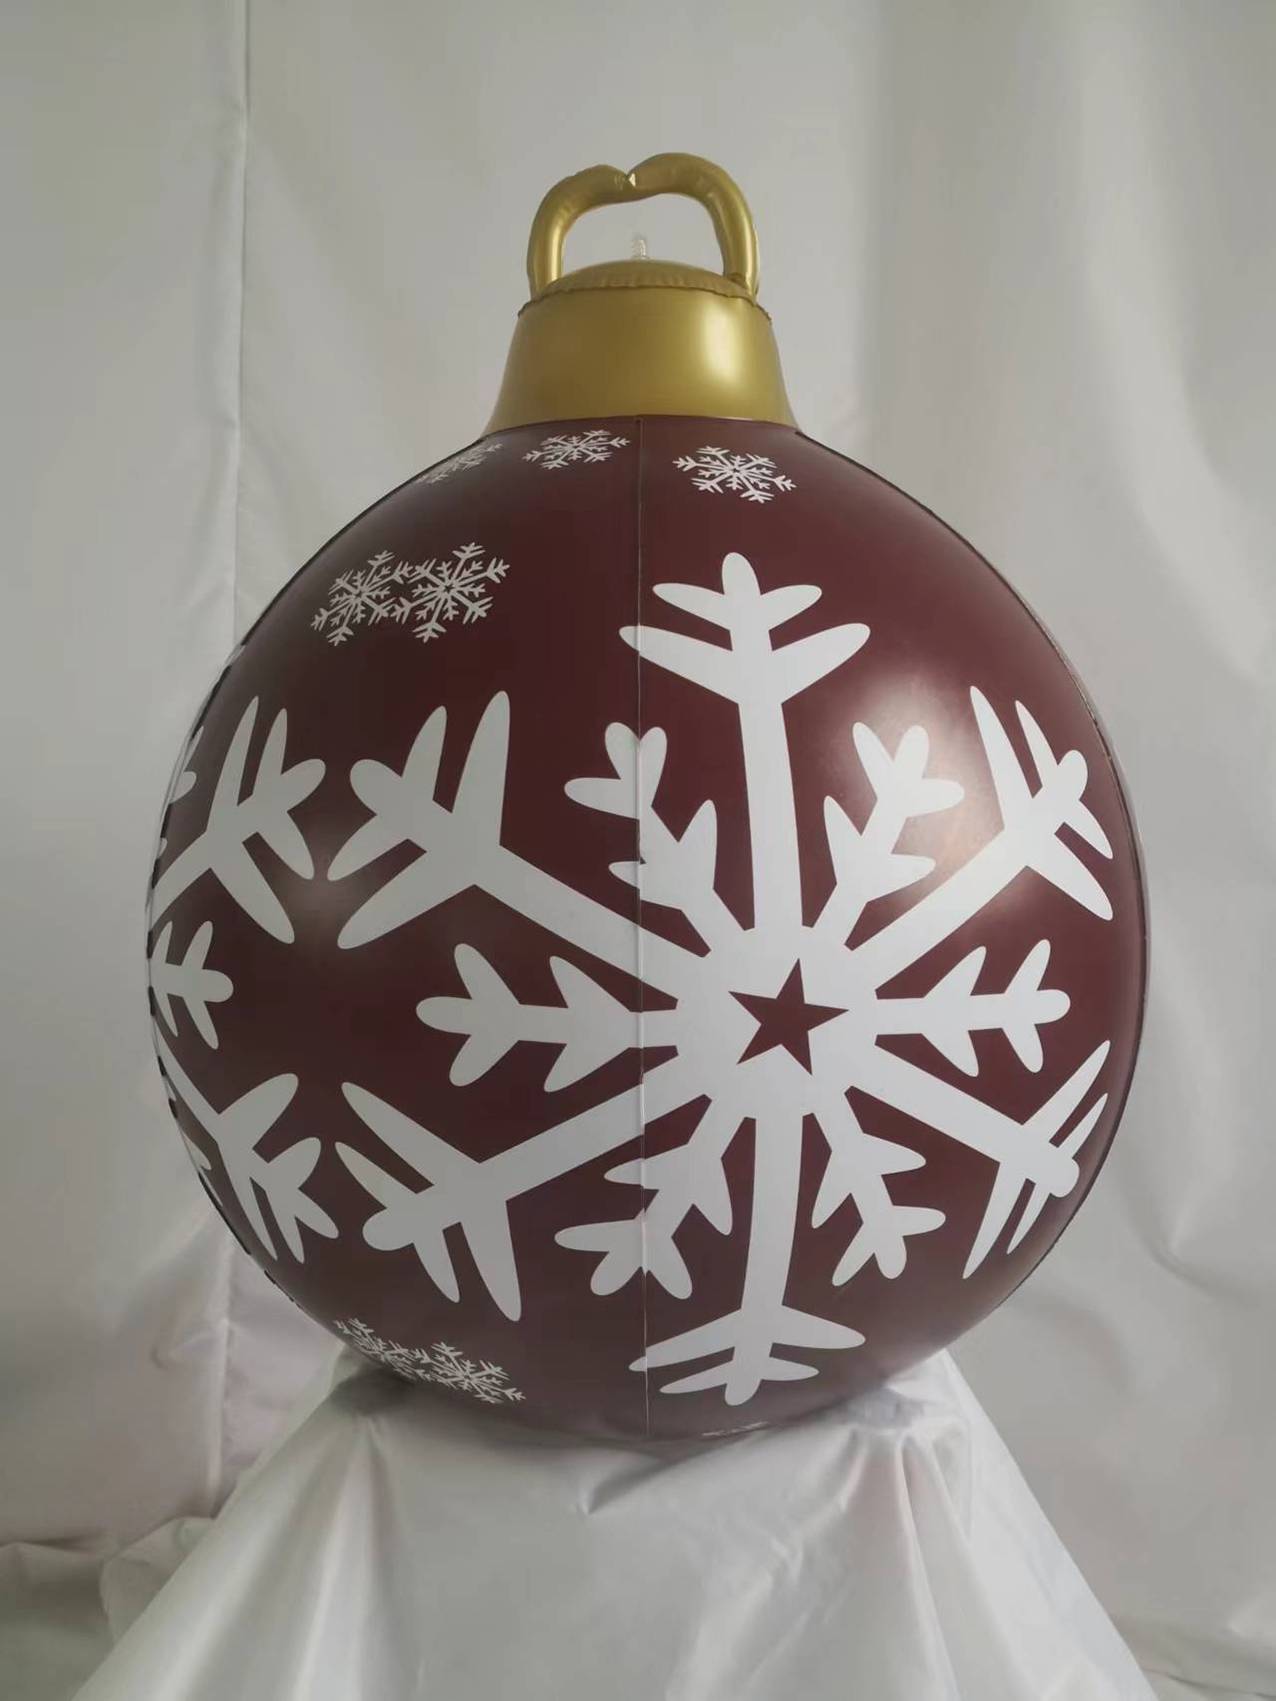 Customised Light Up Inflatable Christmas Yard Decorated Decorations Ball